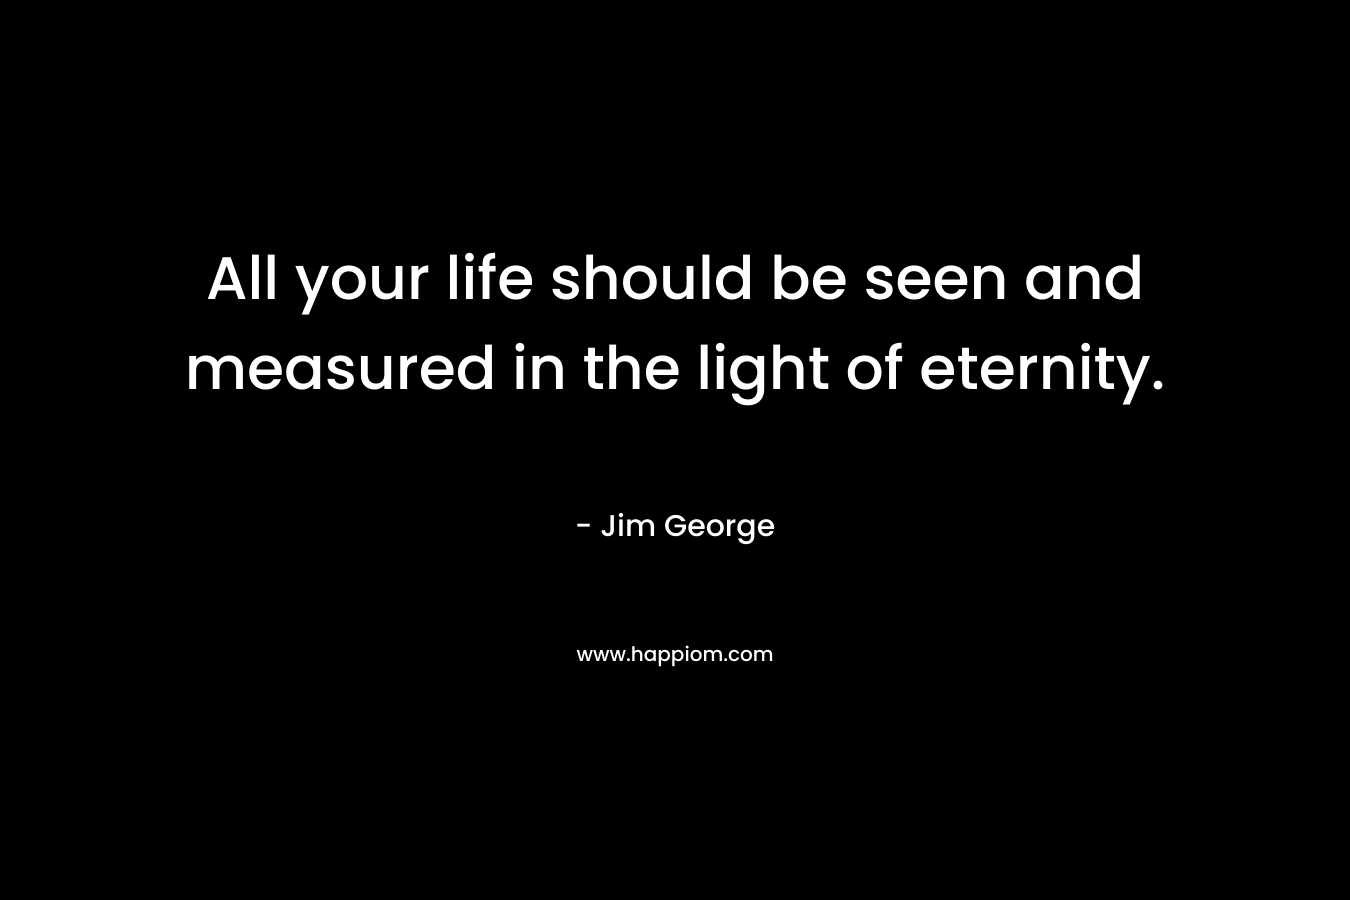 All your life should be seen and measured in the light of eternity.